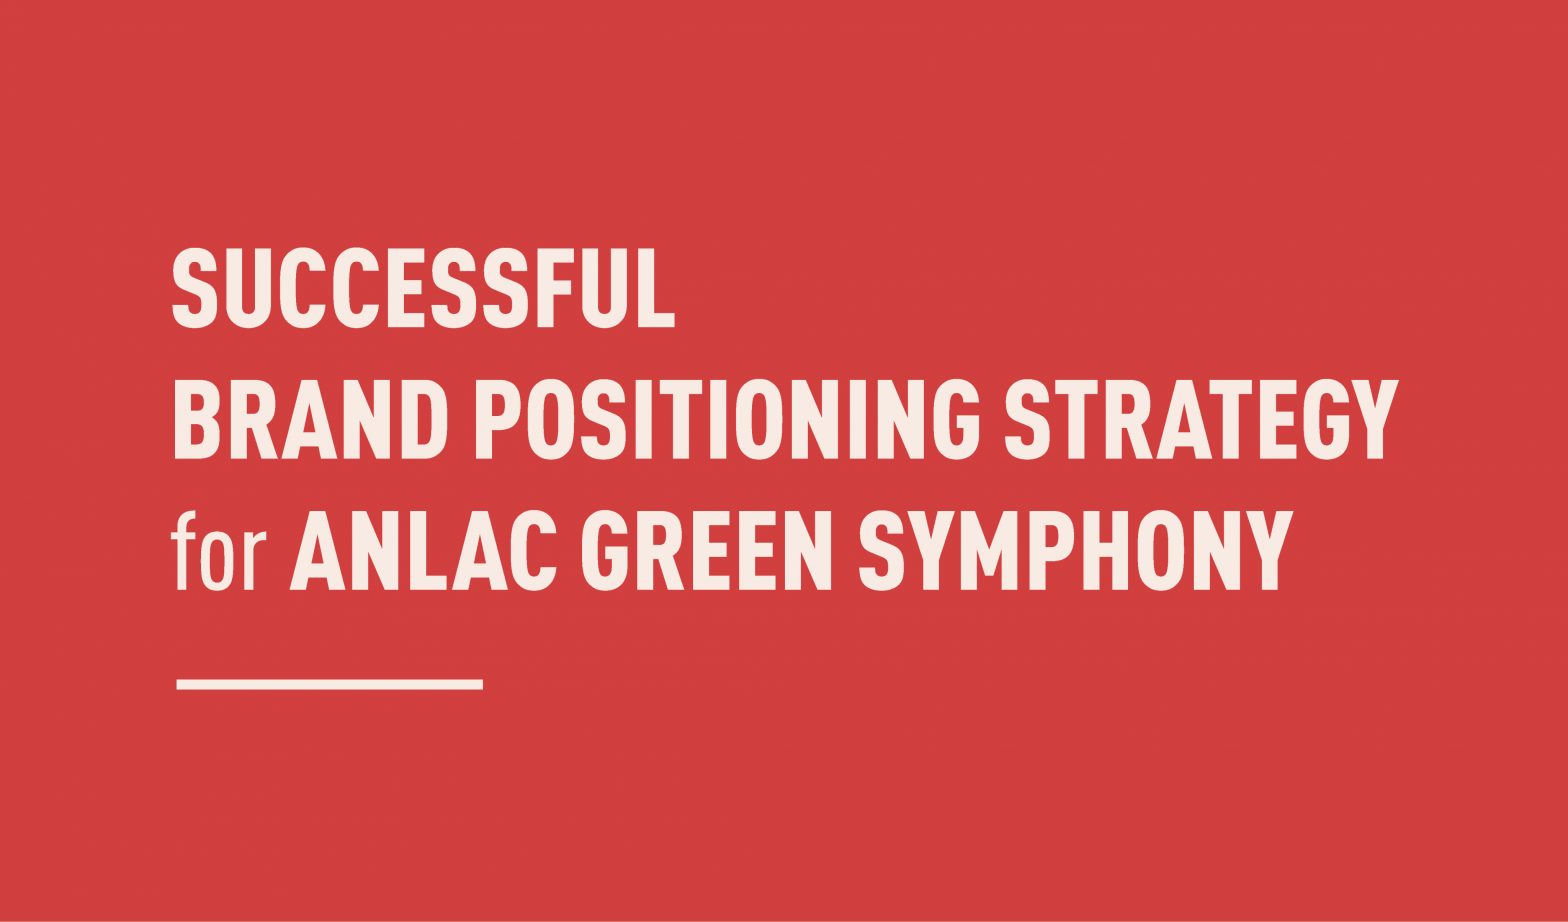 SUCCESSFUL BRAND POSITIONING STRATEGY FOR ANLAC GREEN SYMPHONY TOWNSHIP